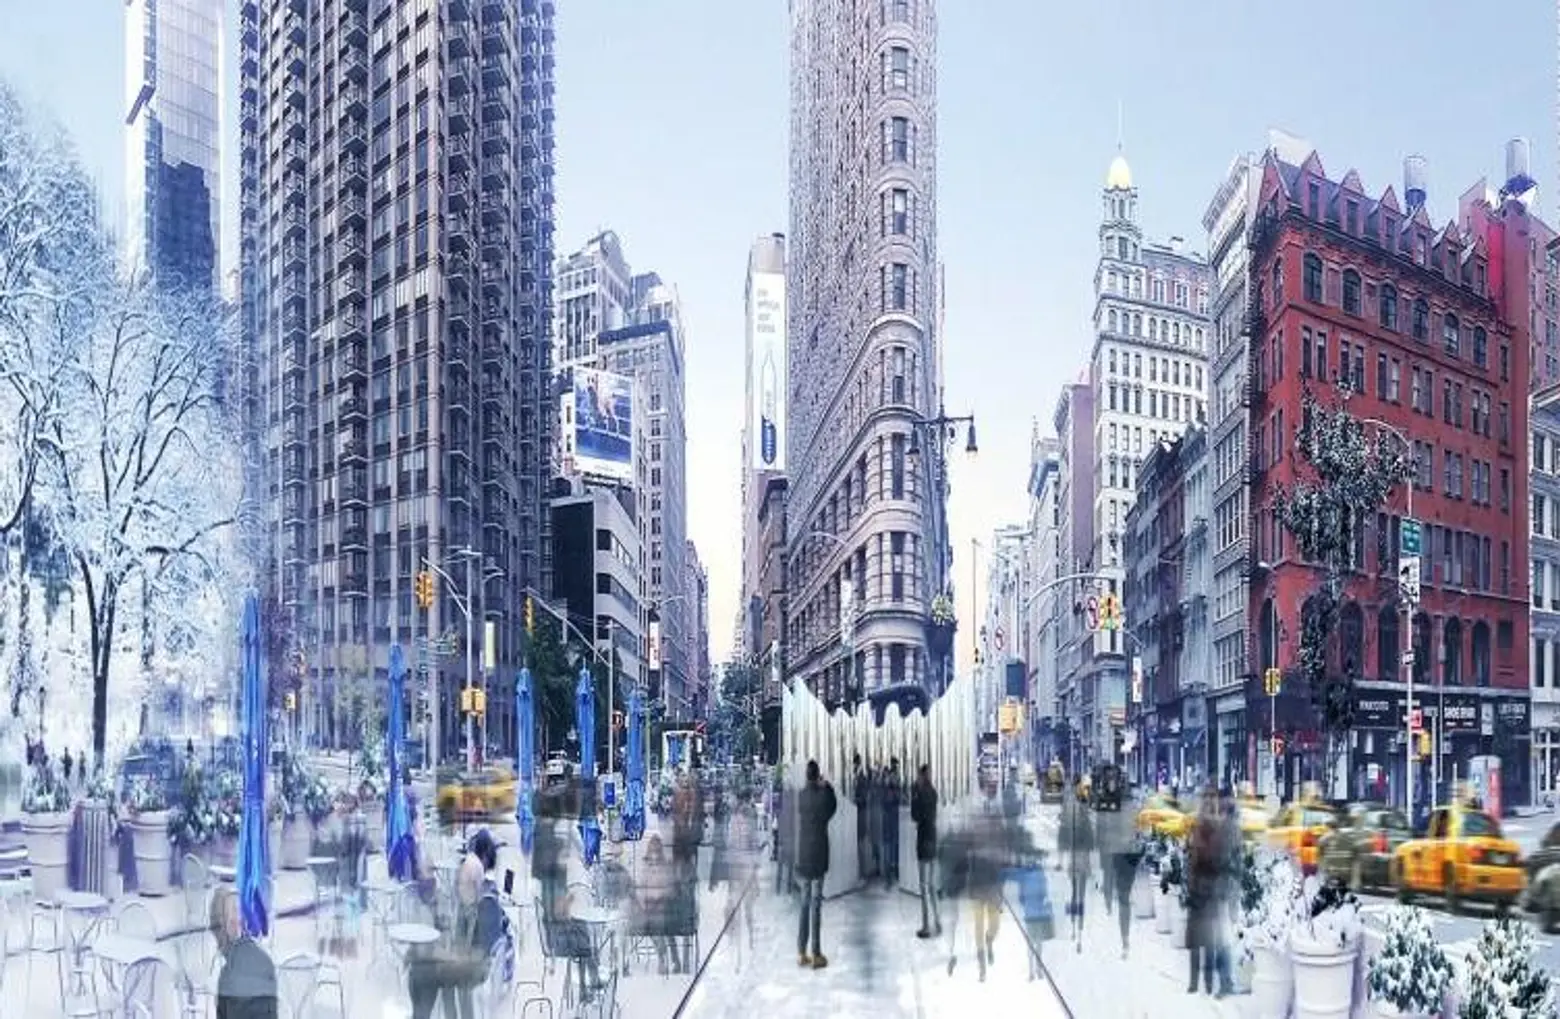 Flatiron plaza’s winning holiday art installation is a cluster of reflective tubes